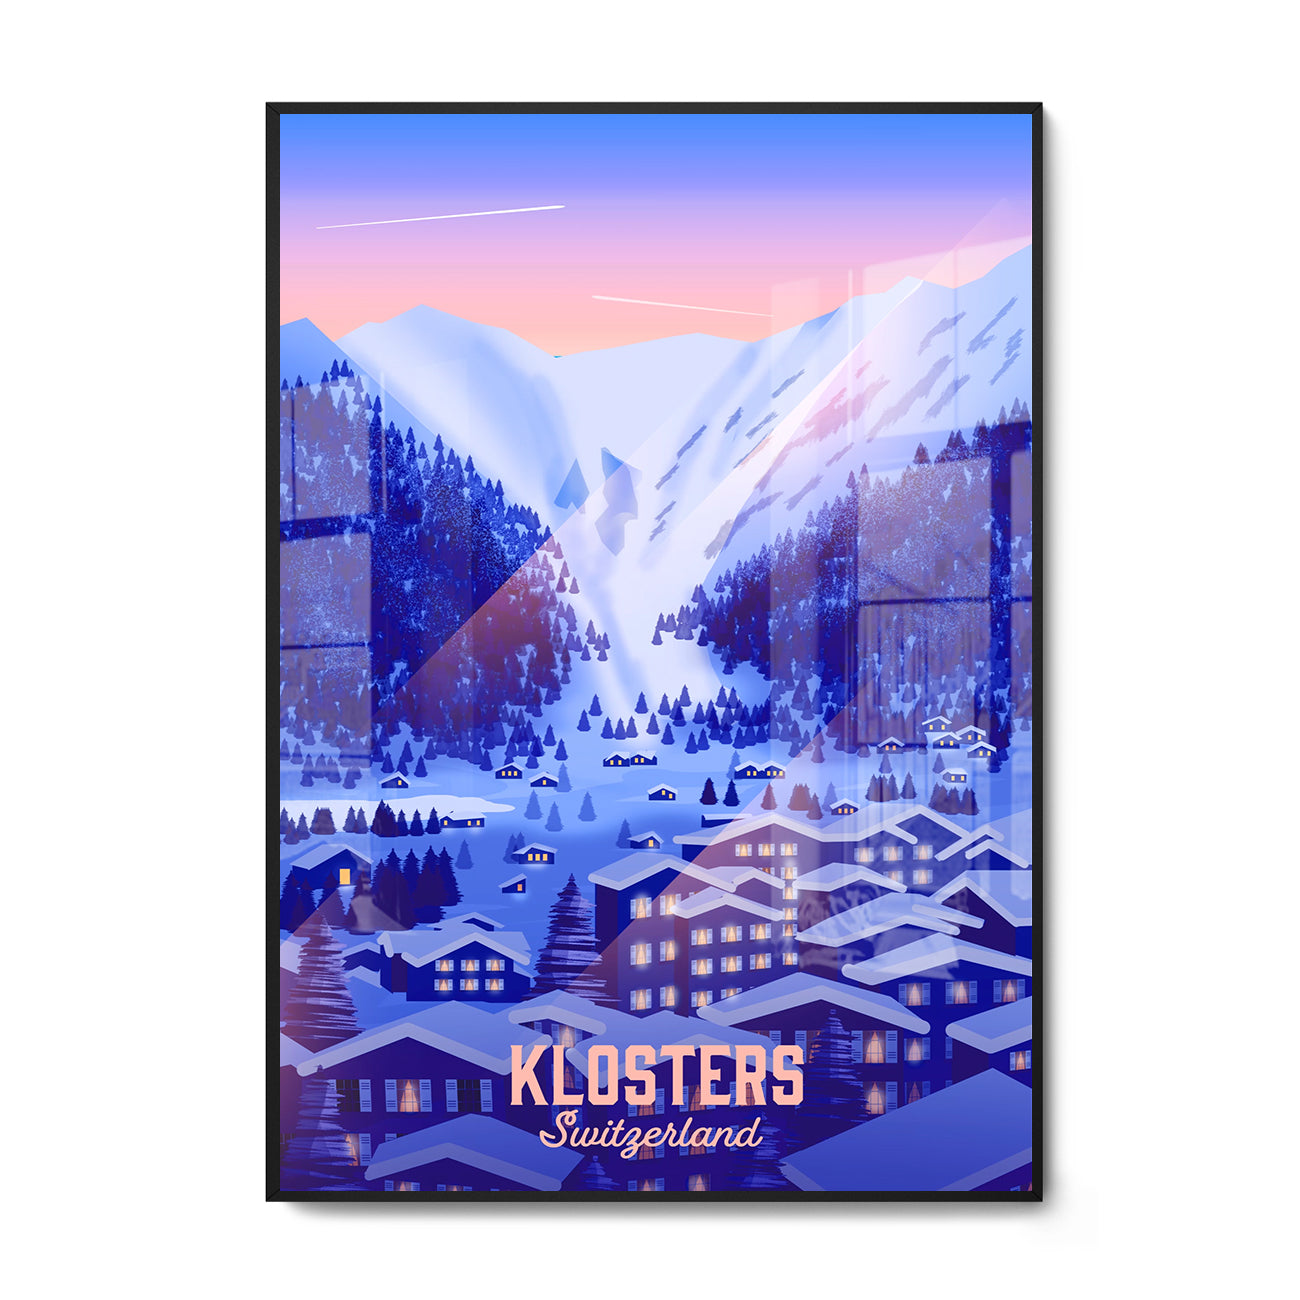 Framed poster of Klosters